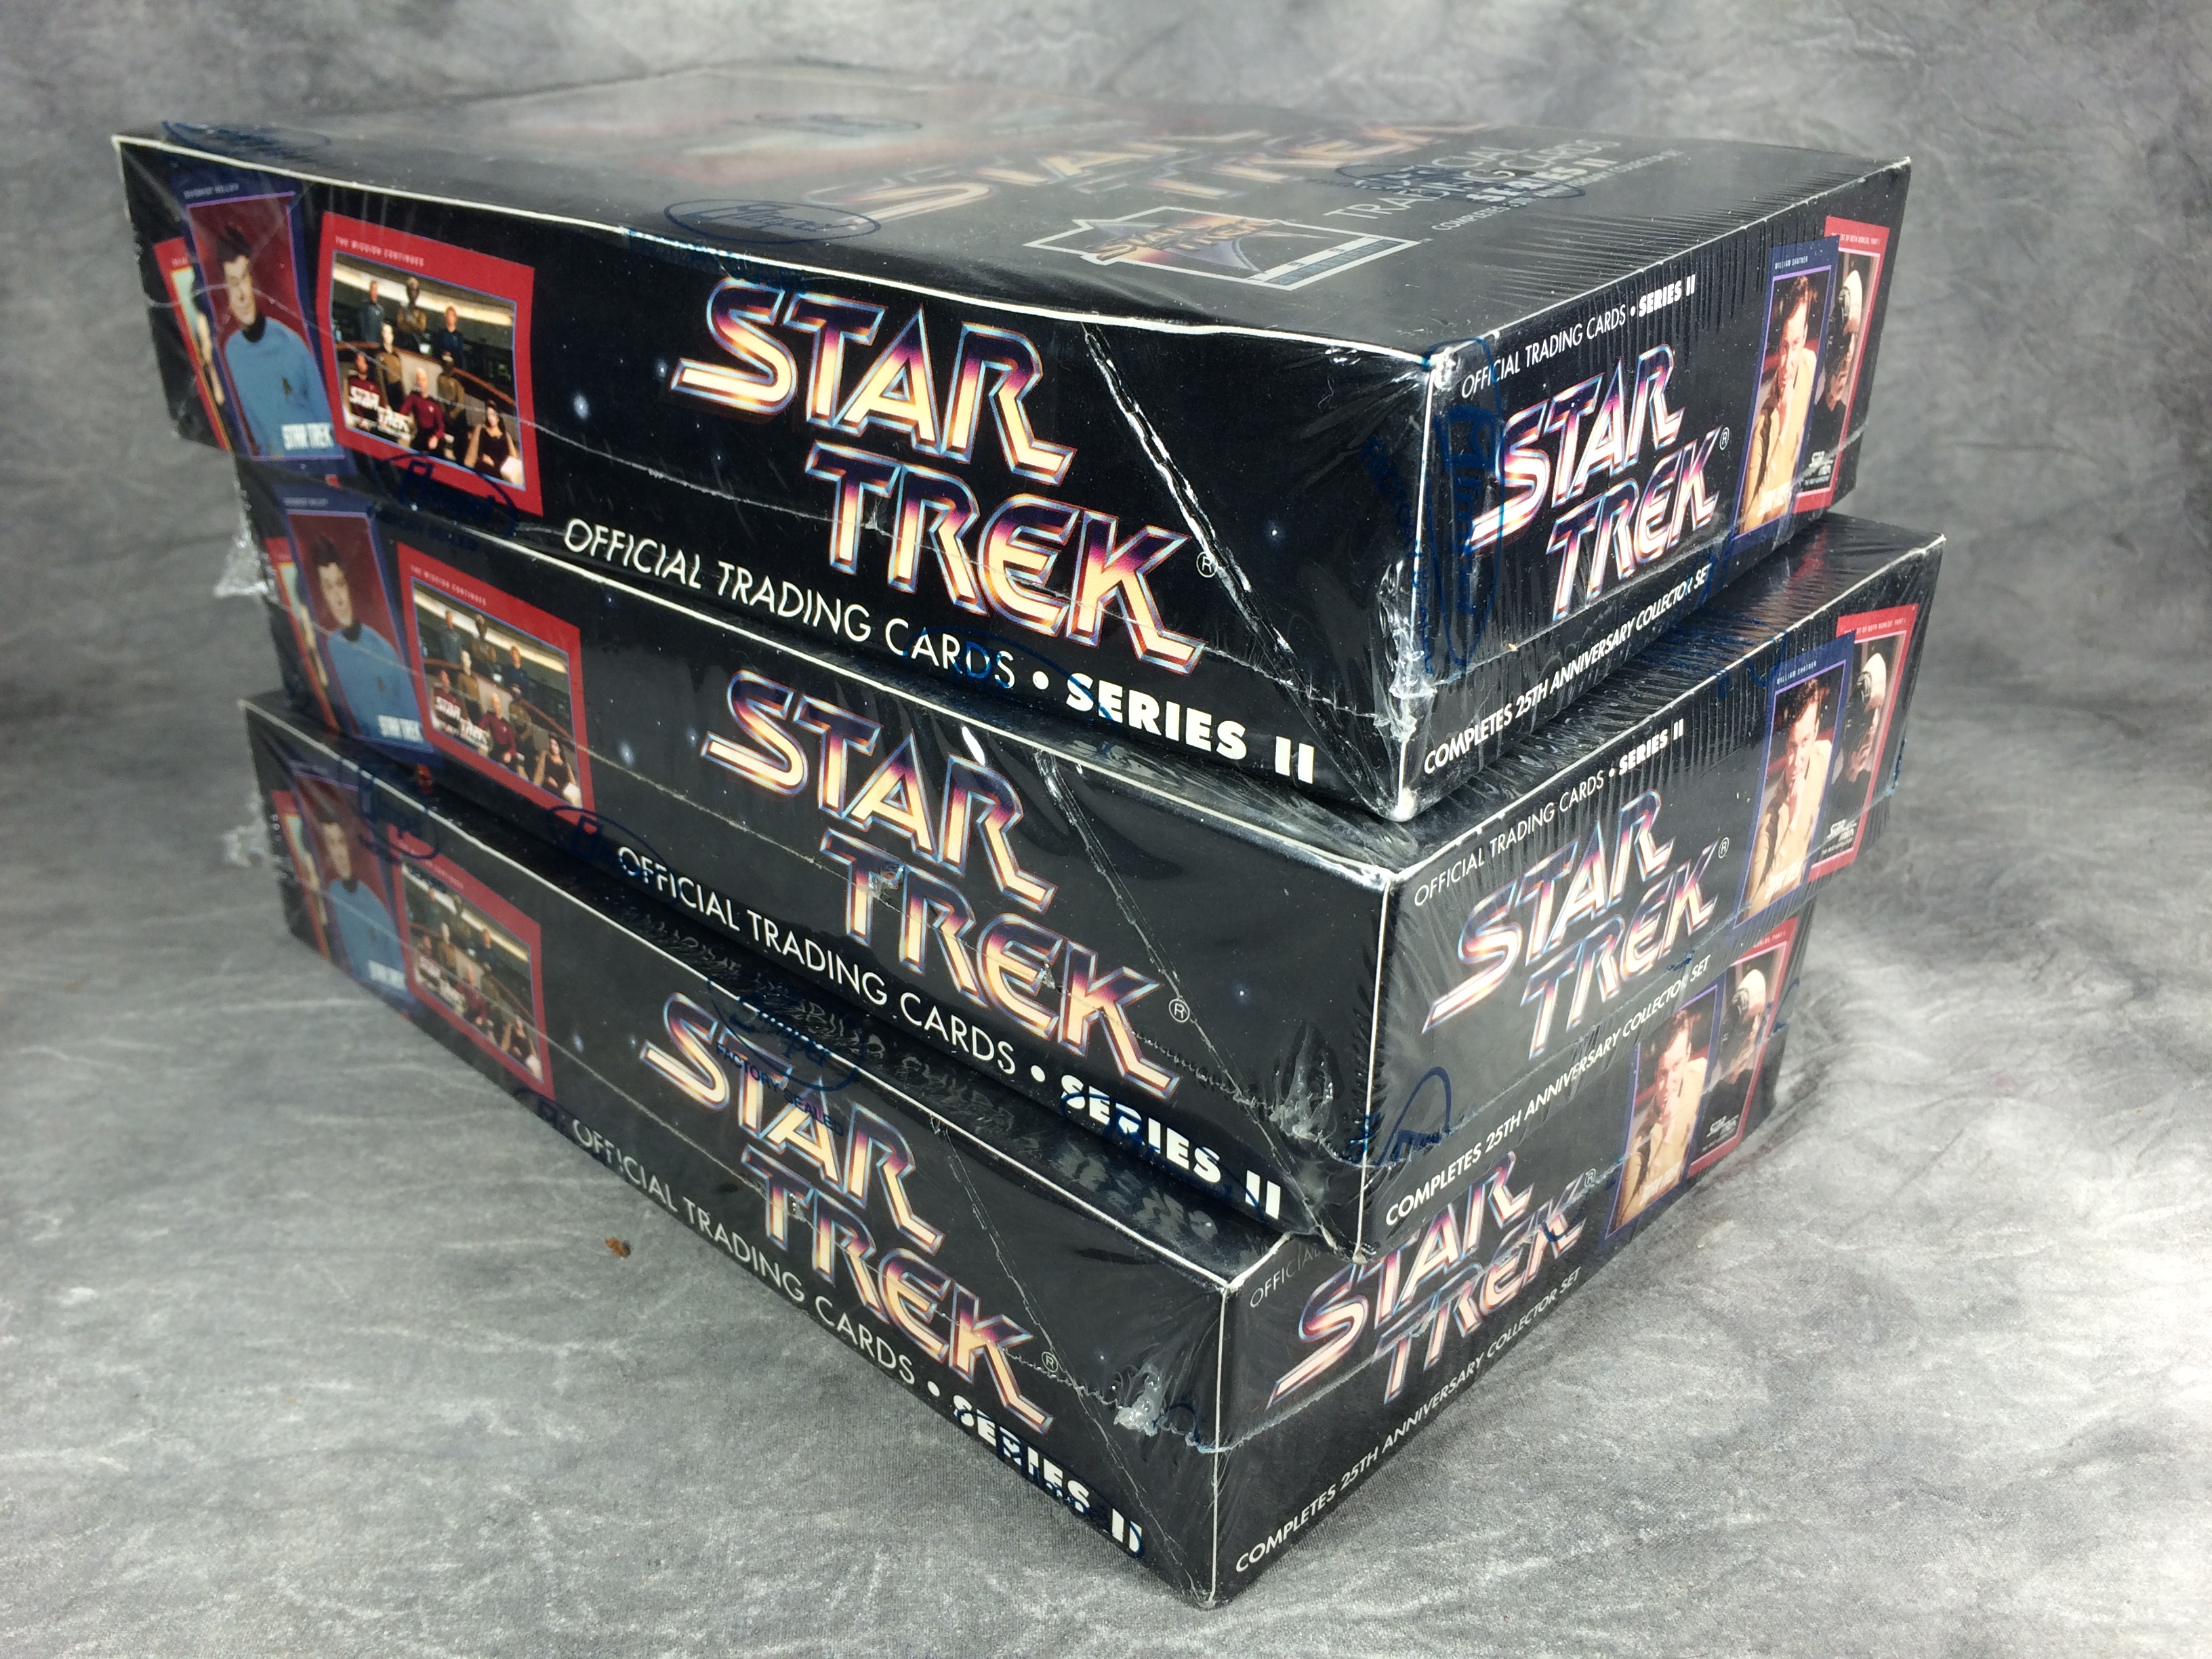 Value of STAR TREK 25th Anniv. Trading Cards 3 Sealed Boxes Wholesale Lot (Impel, Series II ...